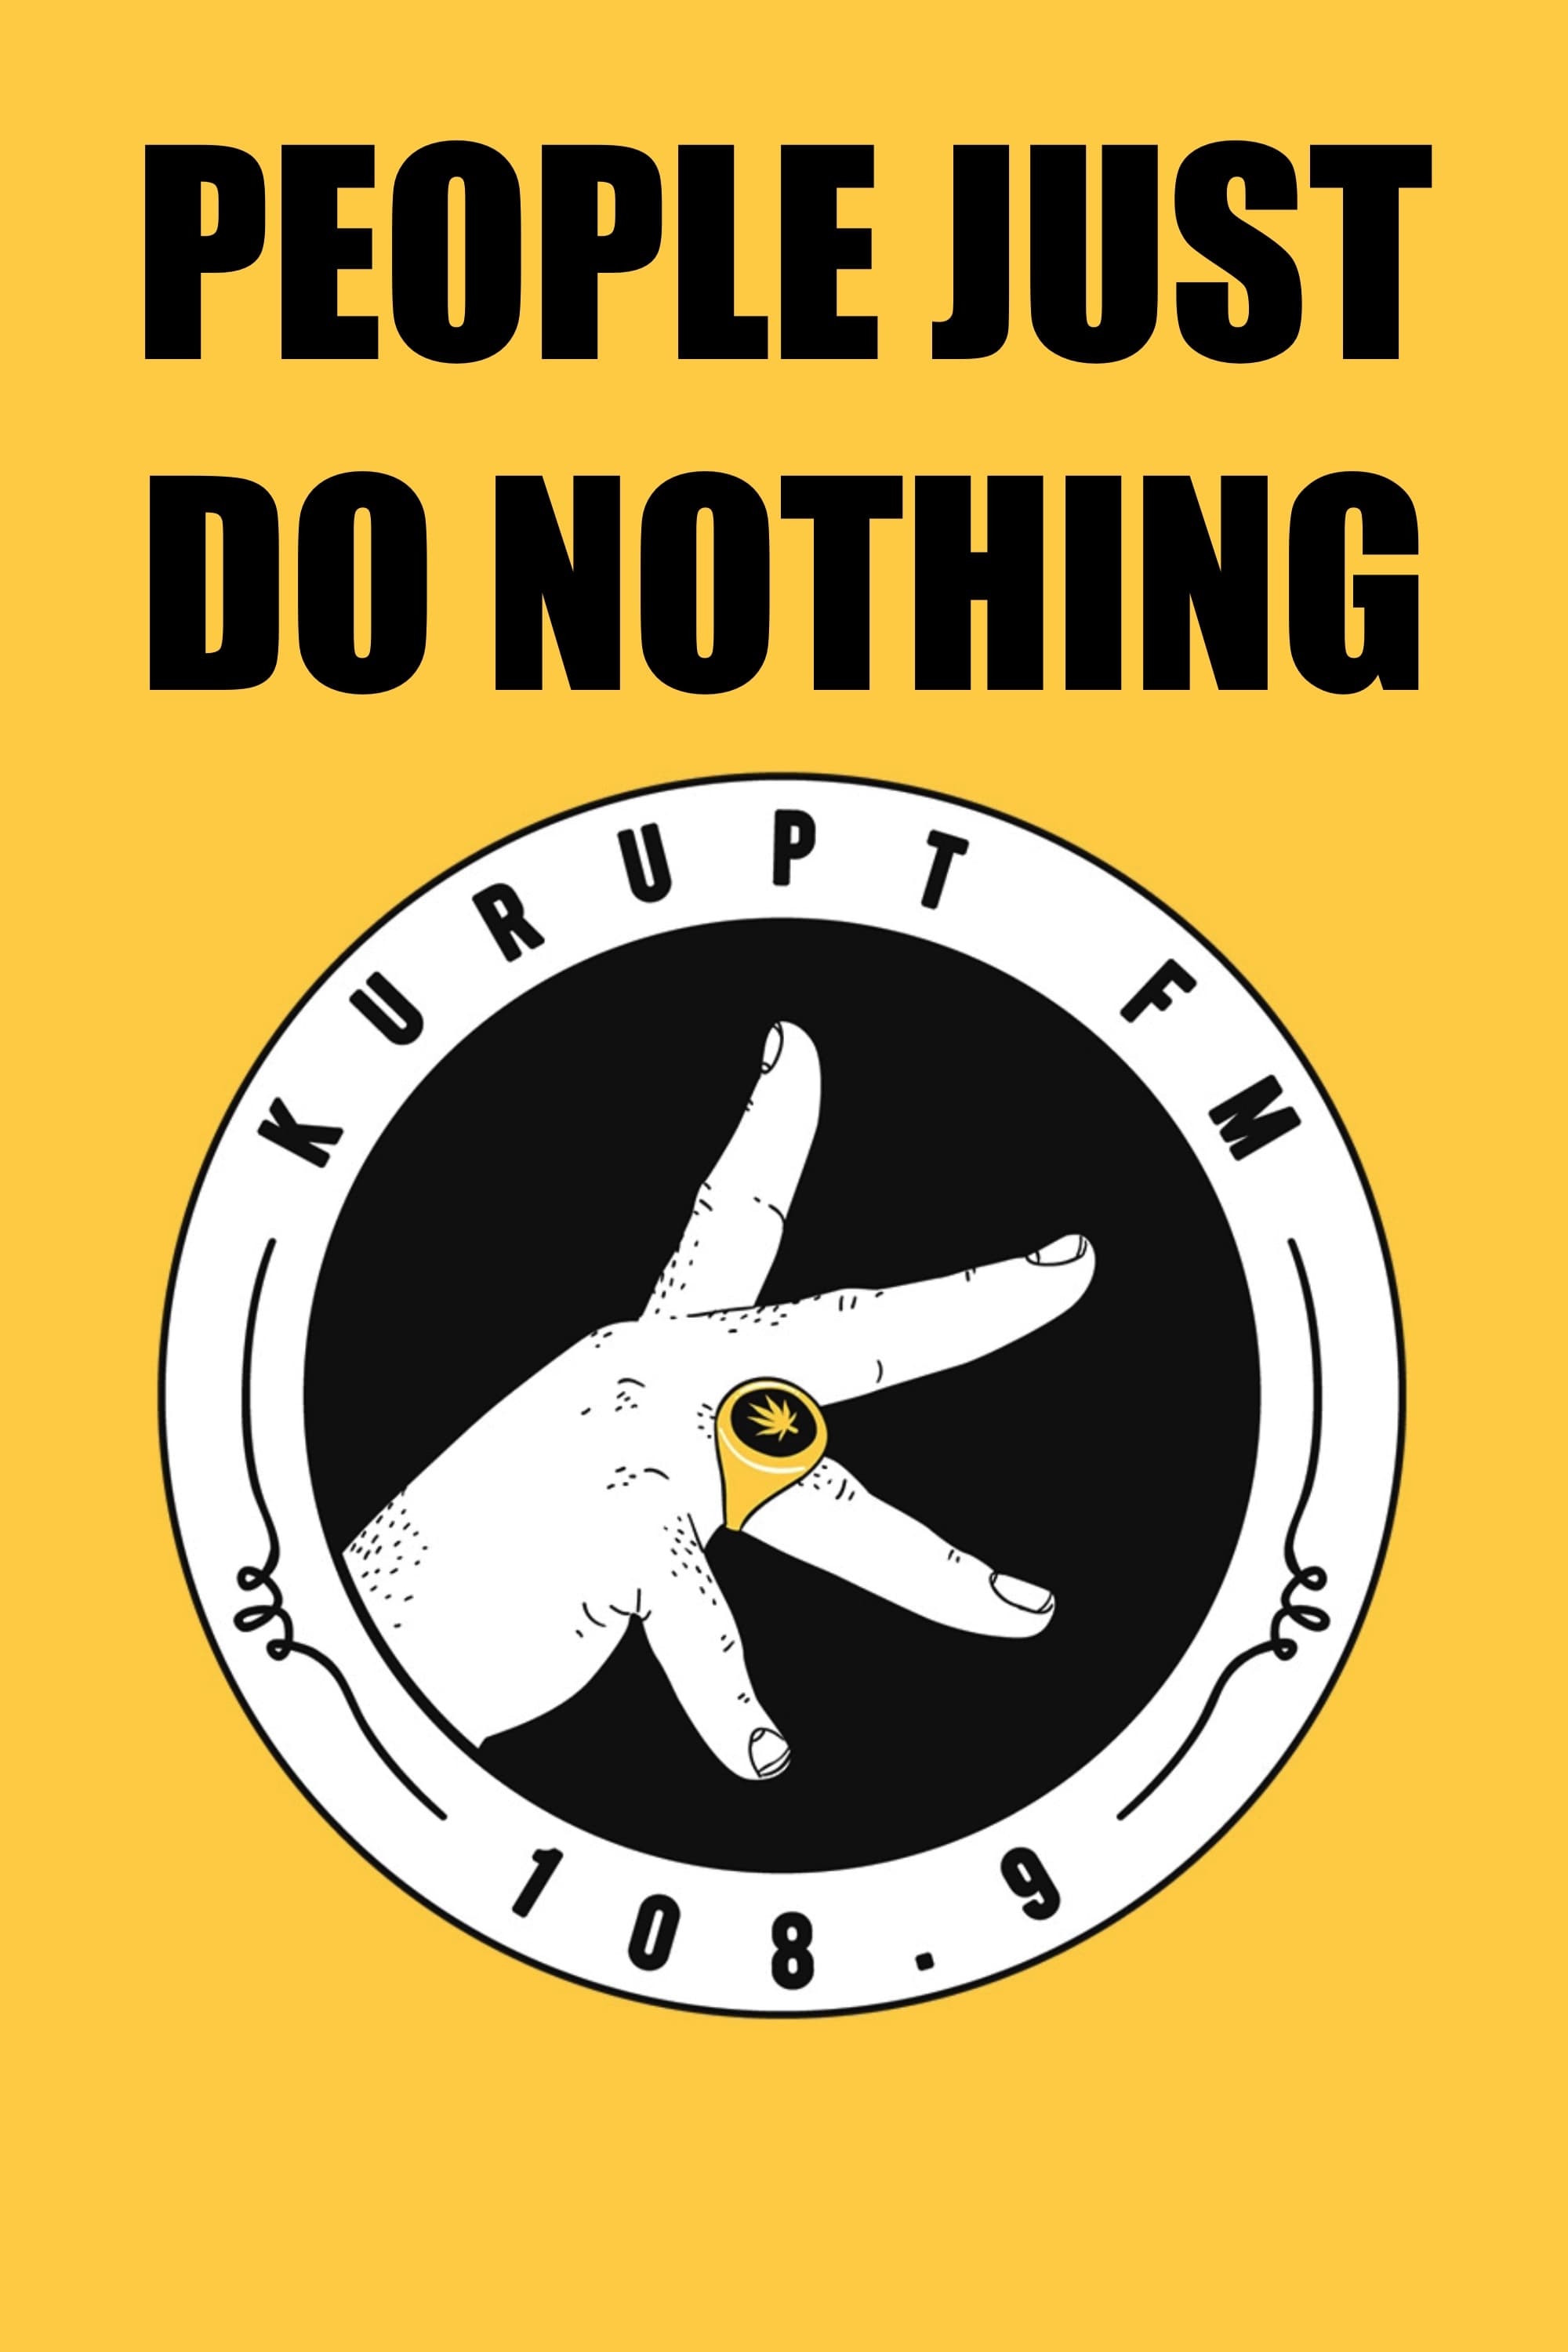 People Just Do Nothing banner